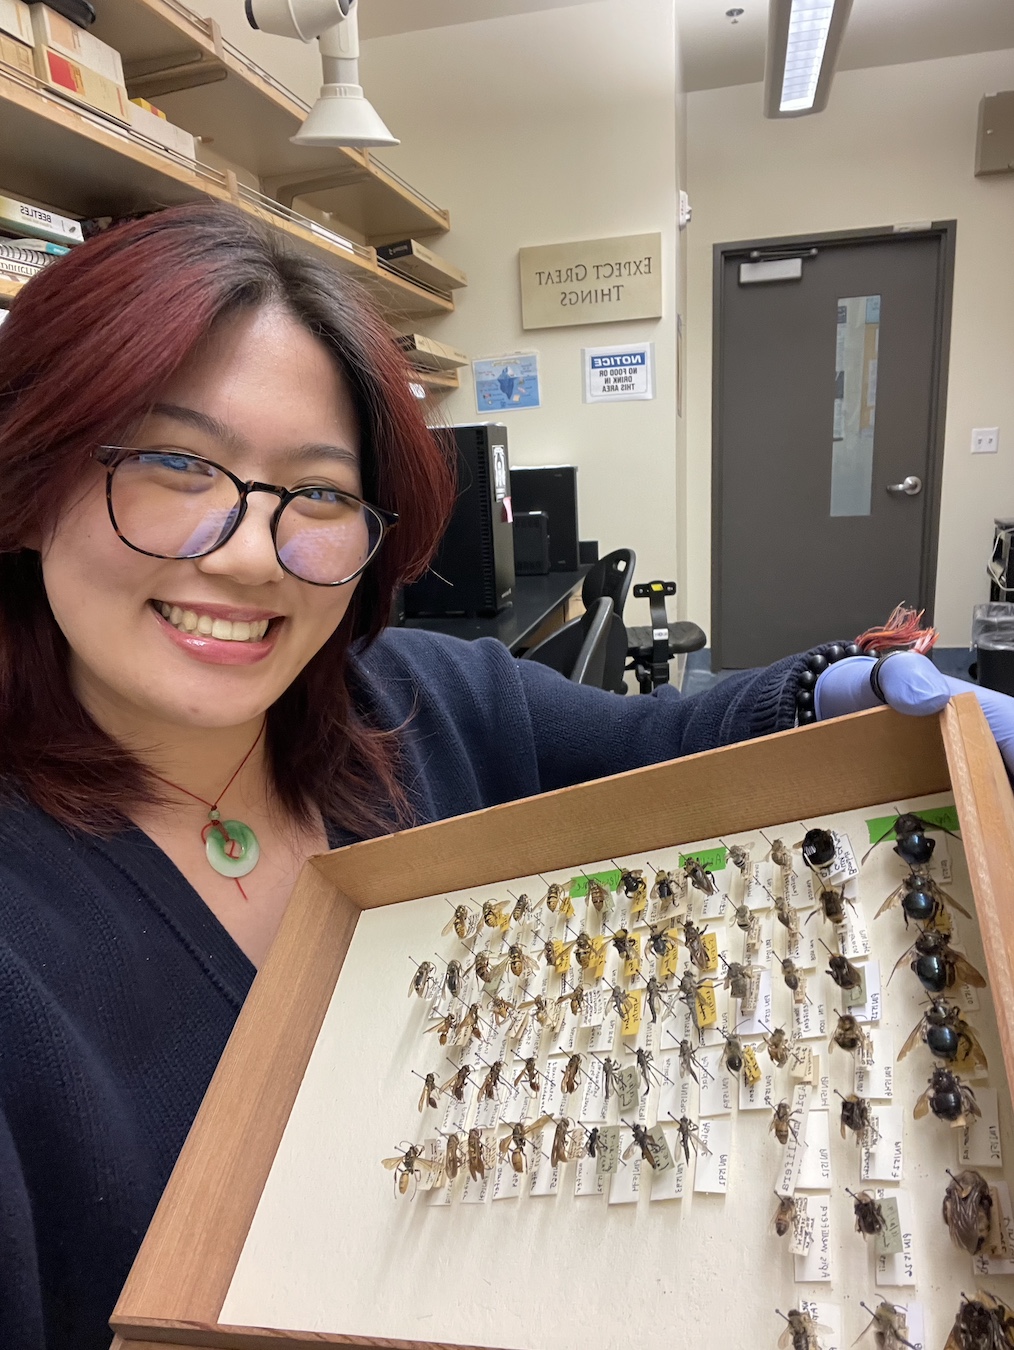 Shulammite smiling and holding a specimen box, containing various rows of various insects